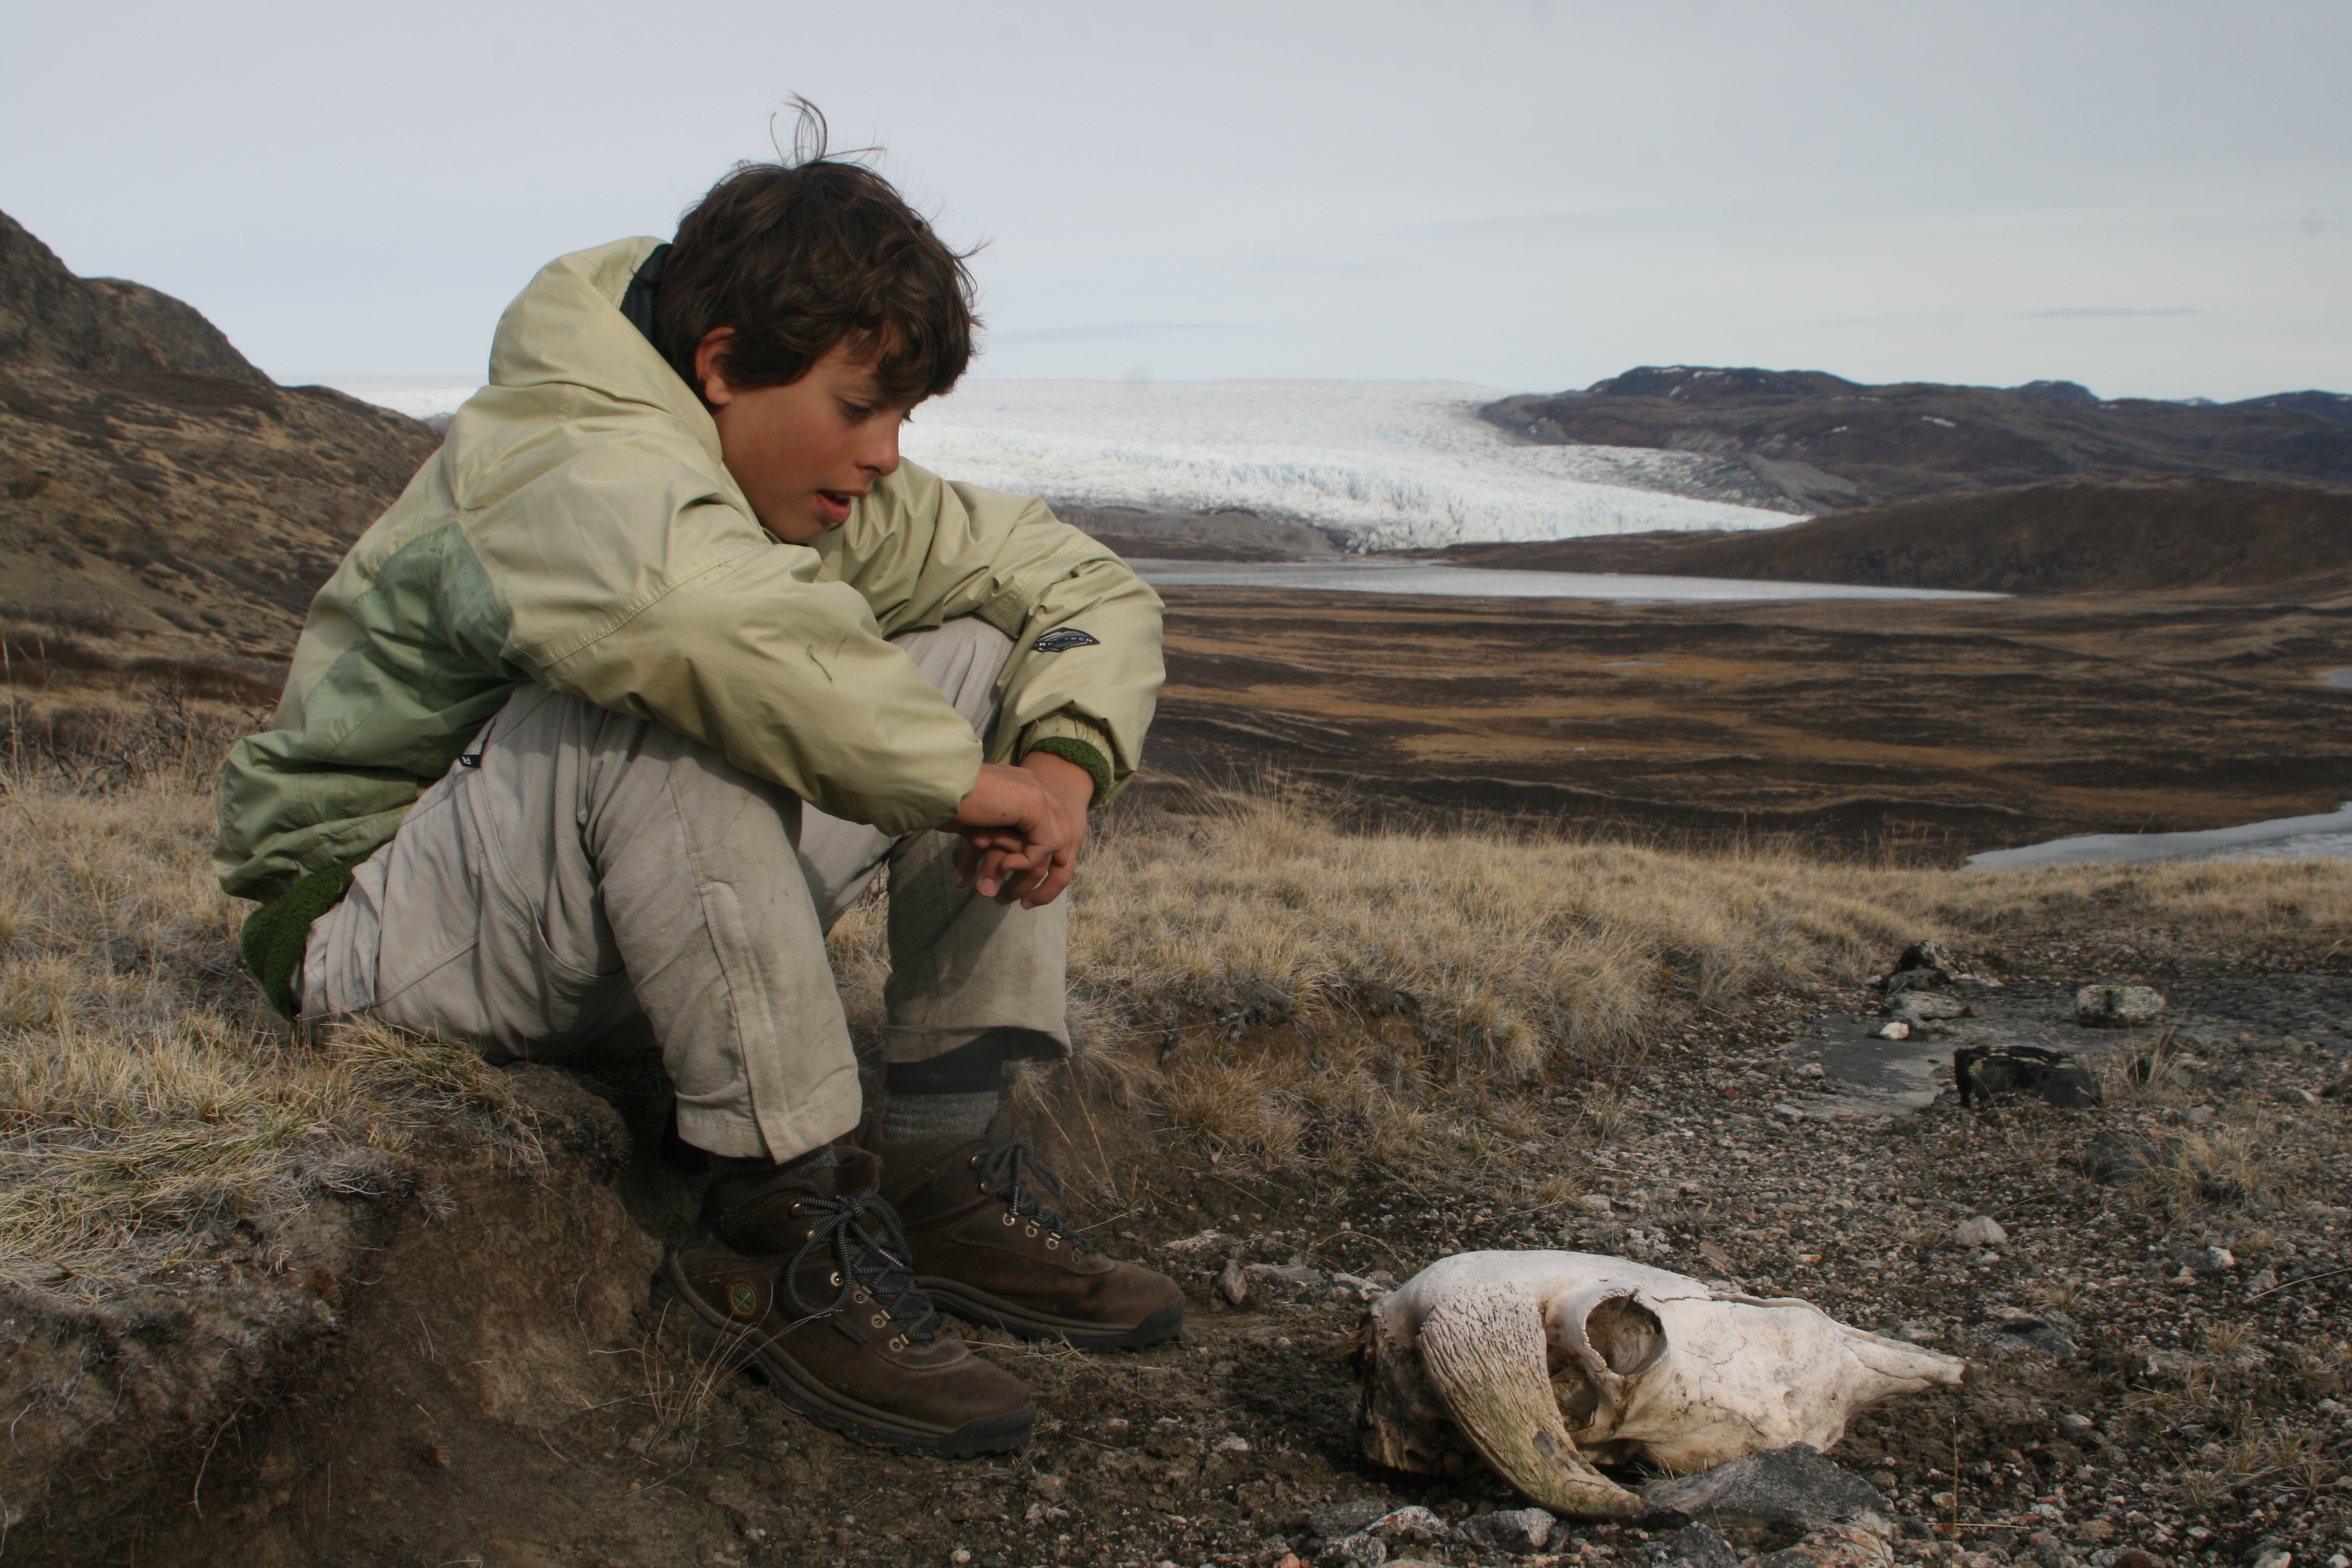 Boy sits on ground and looks at scull of muskox outdoors in Greenland